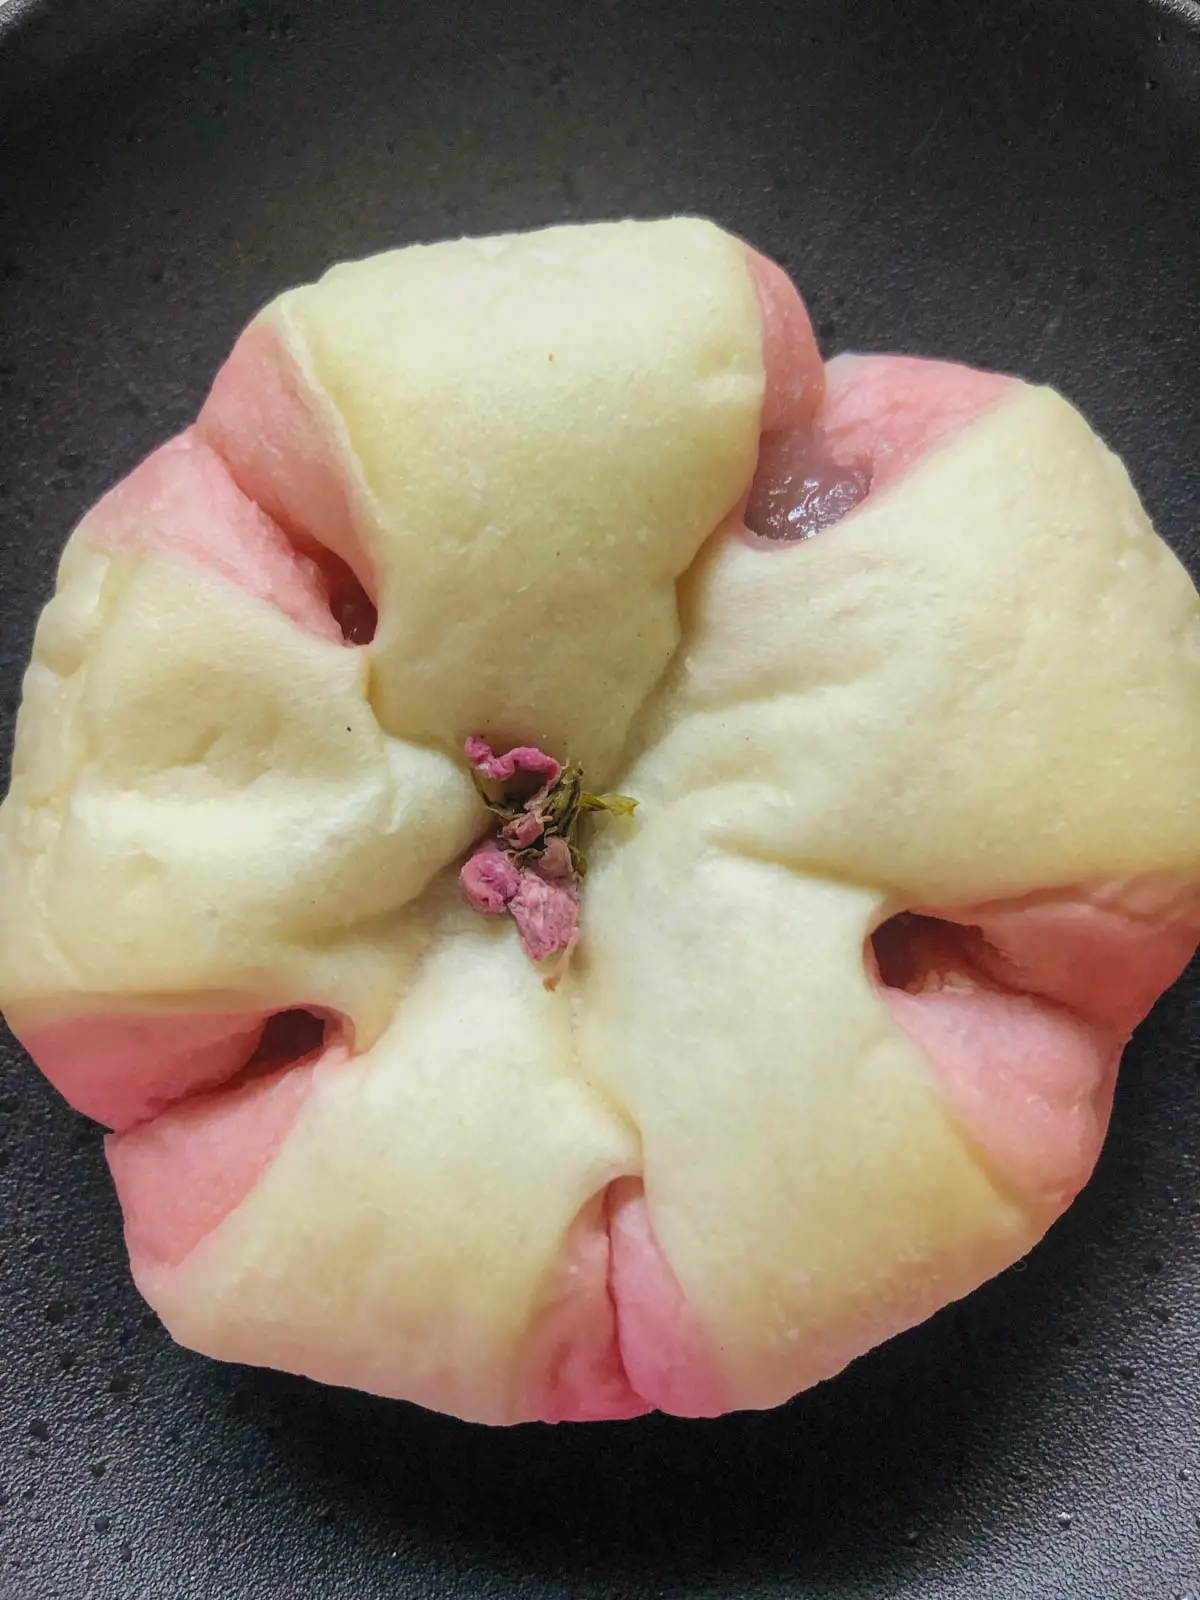 A sakura pastry or pastry that looks like a cherry blossom. 